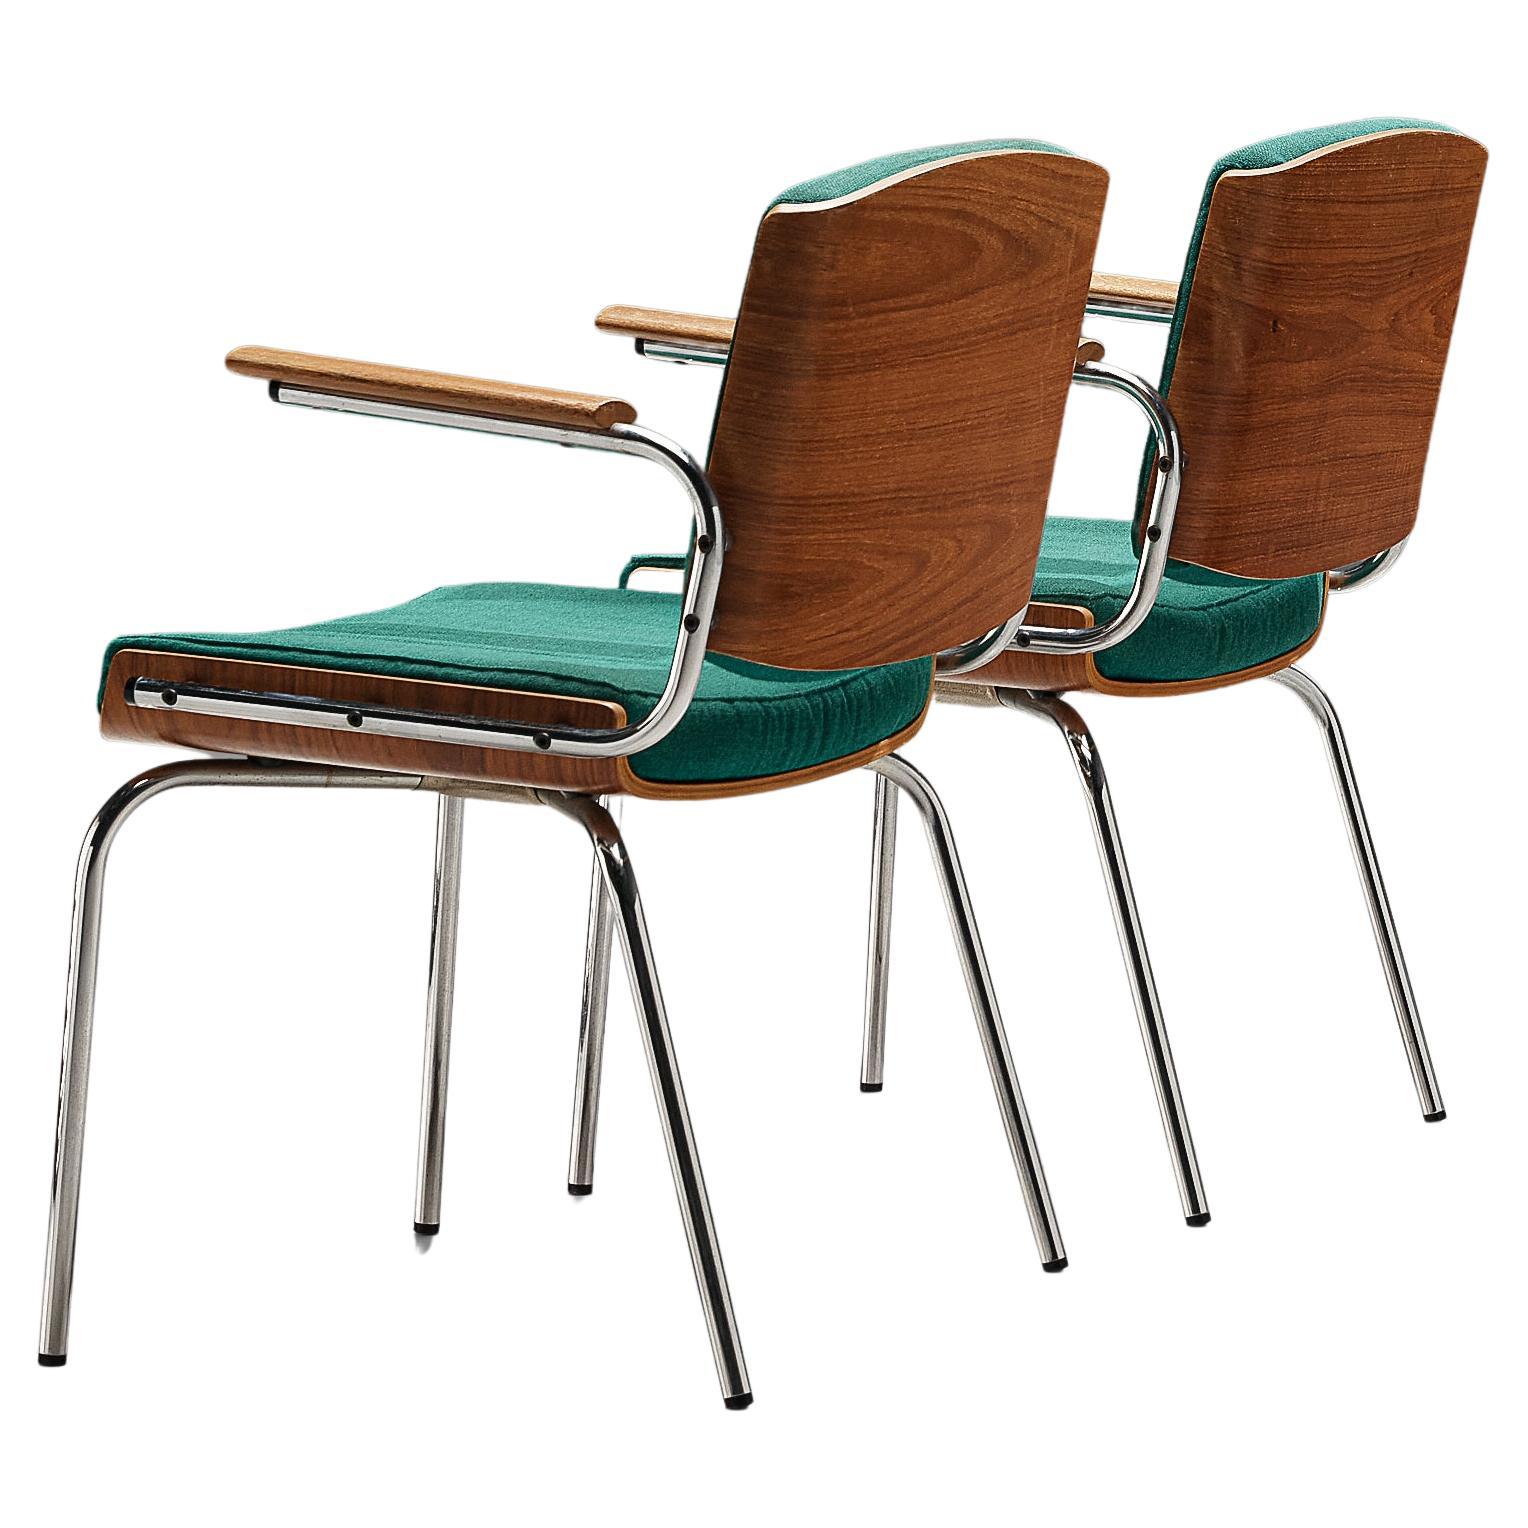 Danish Pair of Dining Chairs in Teak and Green Upholstery